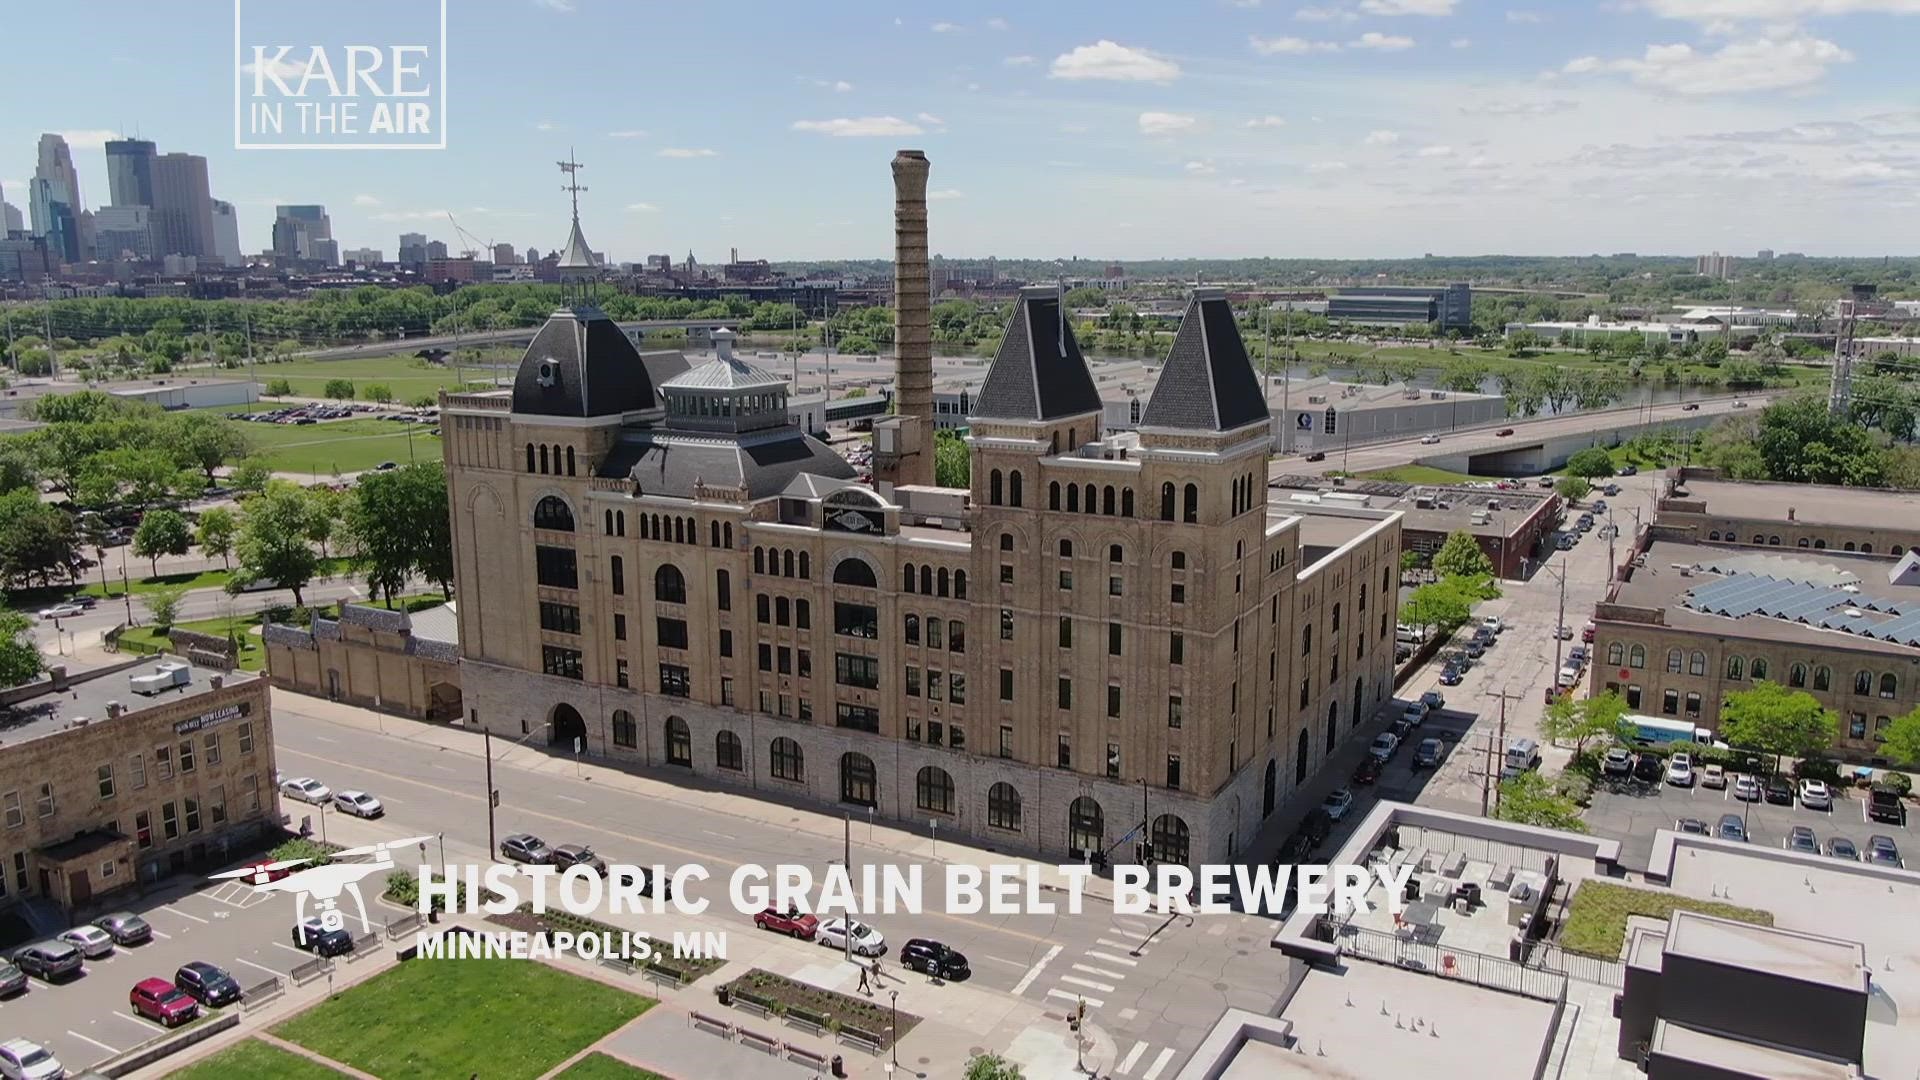 The historic Grain Belt Brewery is no longer producing suds, but the building itself still gets a fair share of attention and tonight's KARE in the Air shows why.